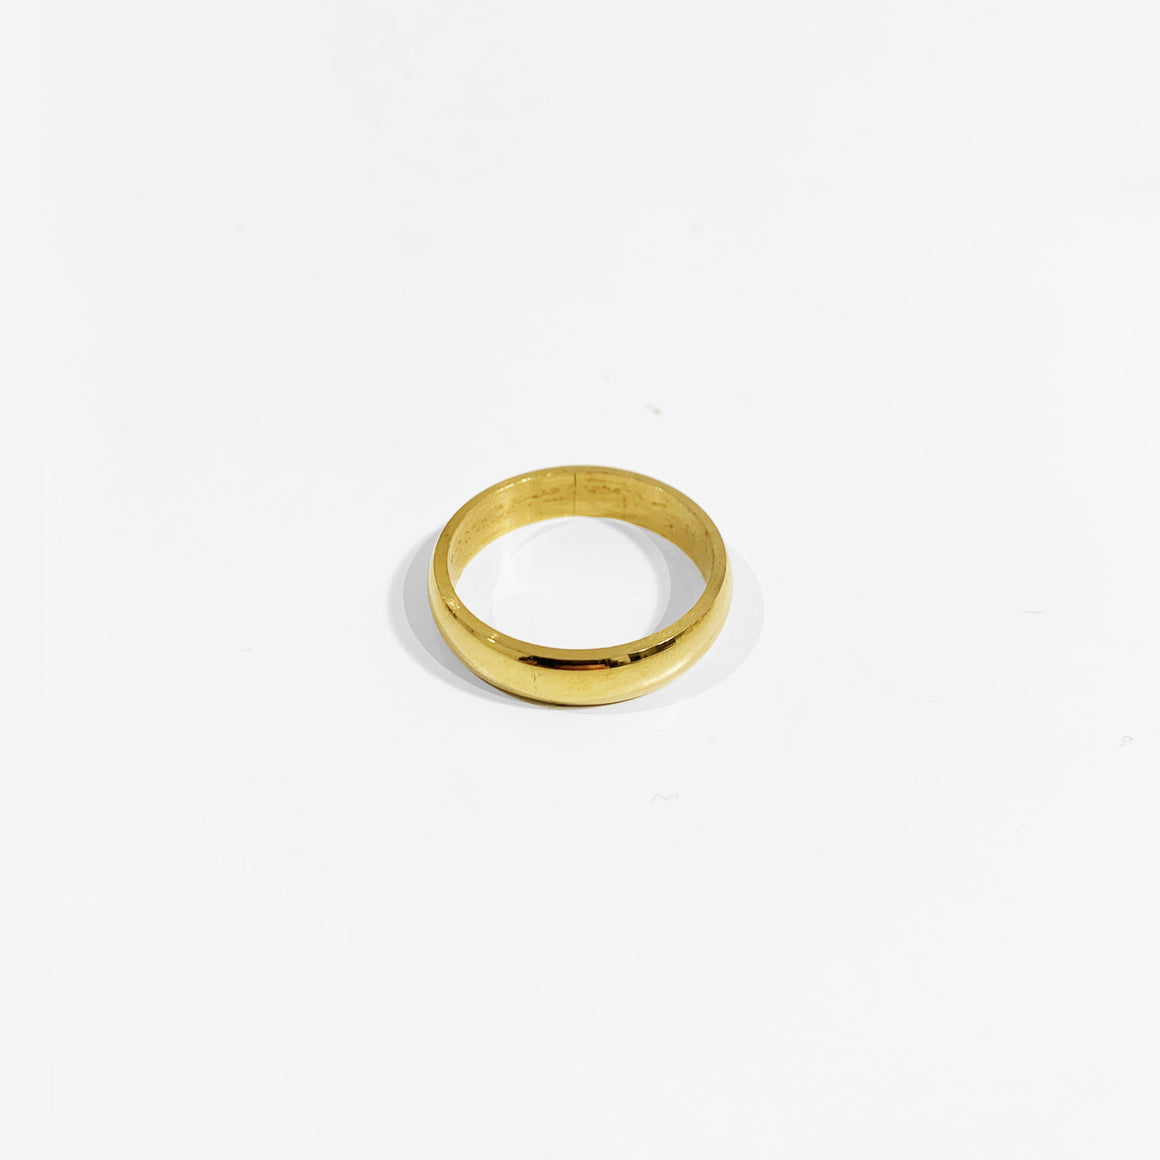 54 FLORAL 6mm BAND SIGNET RING - GOLD